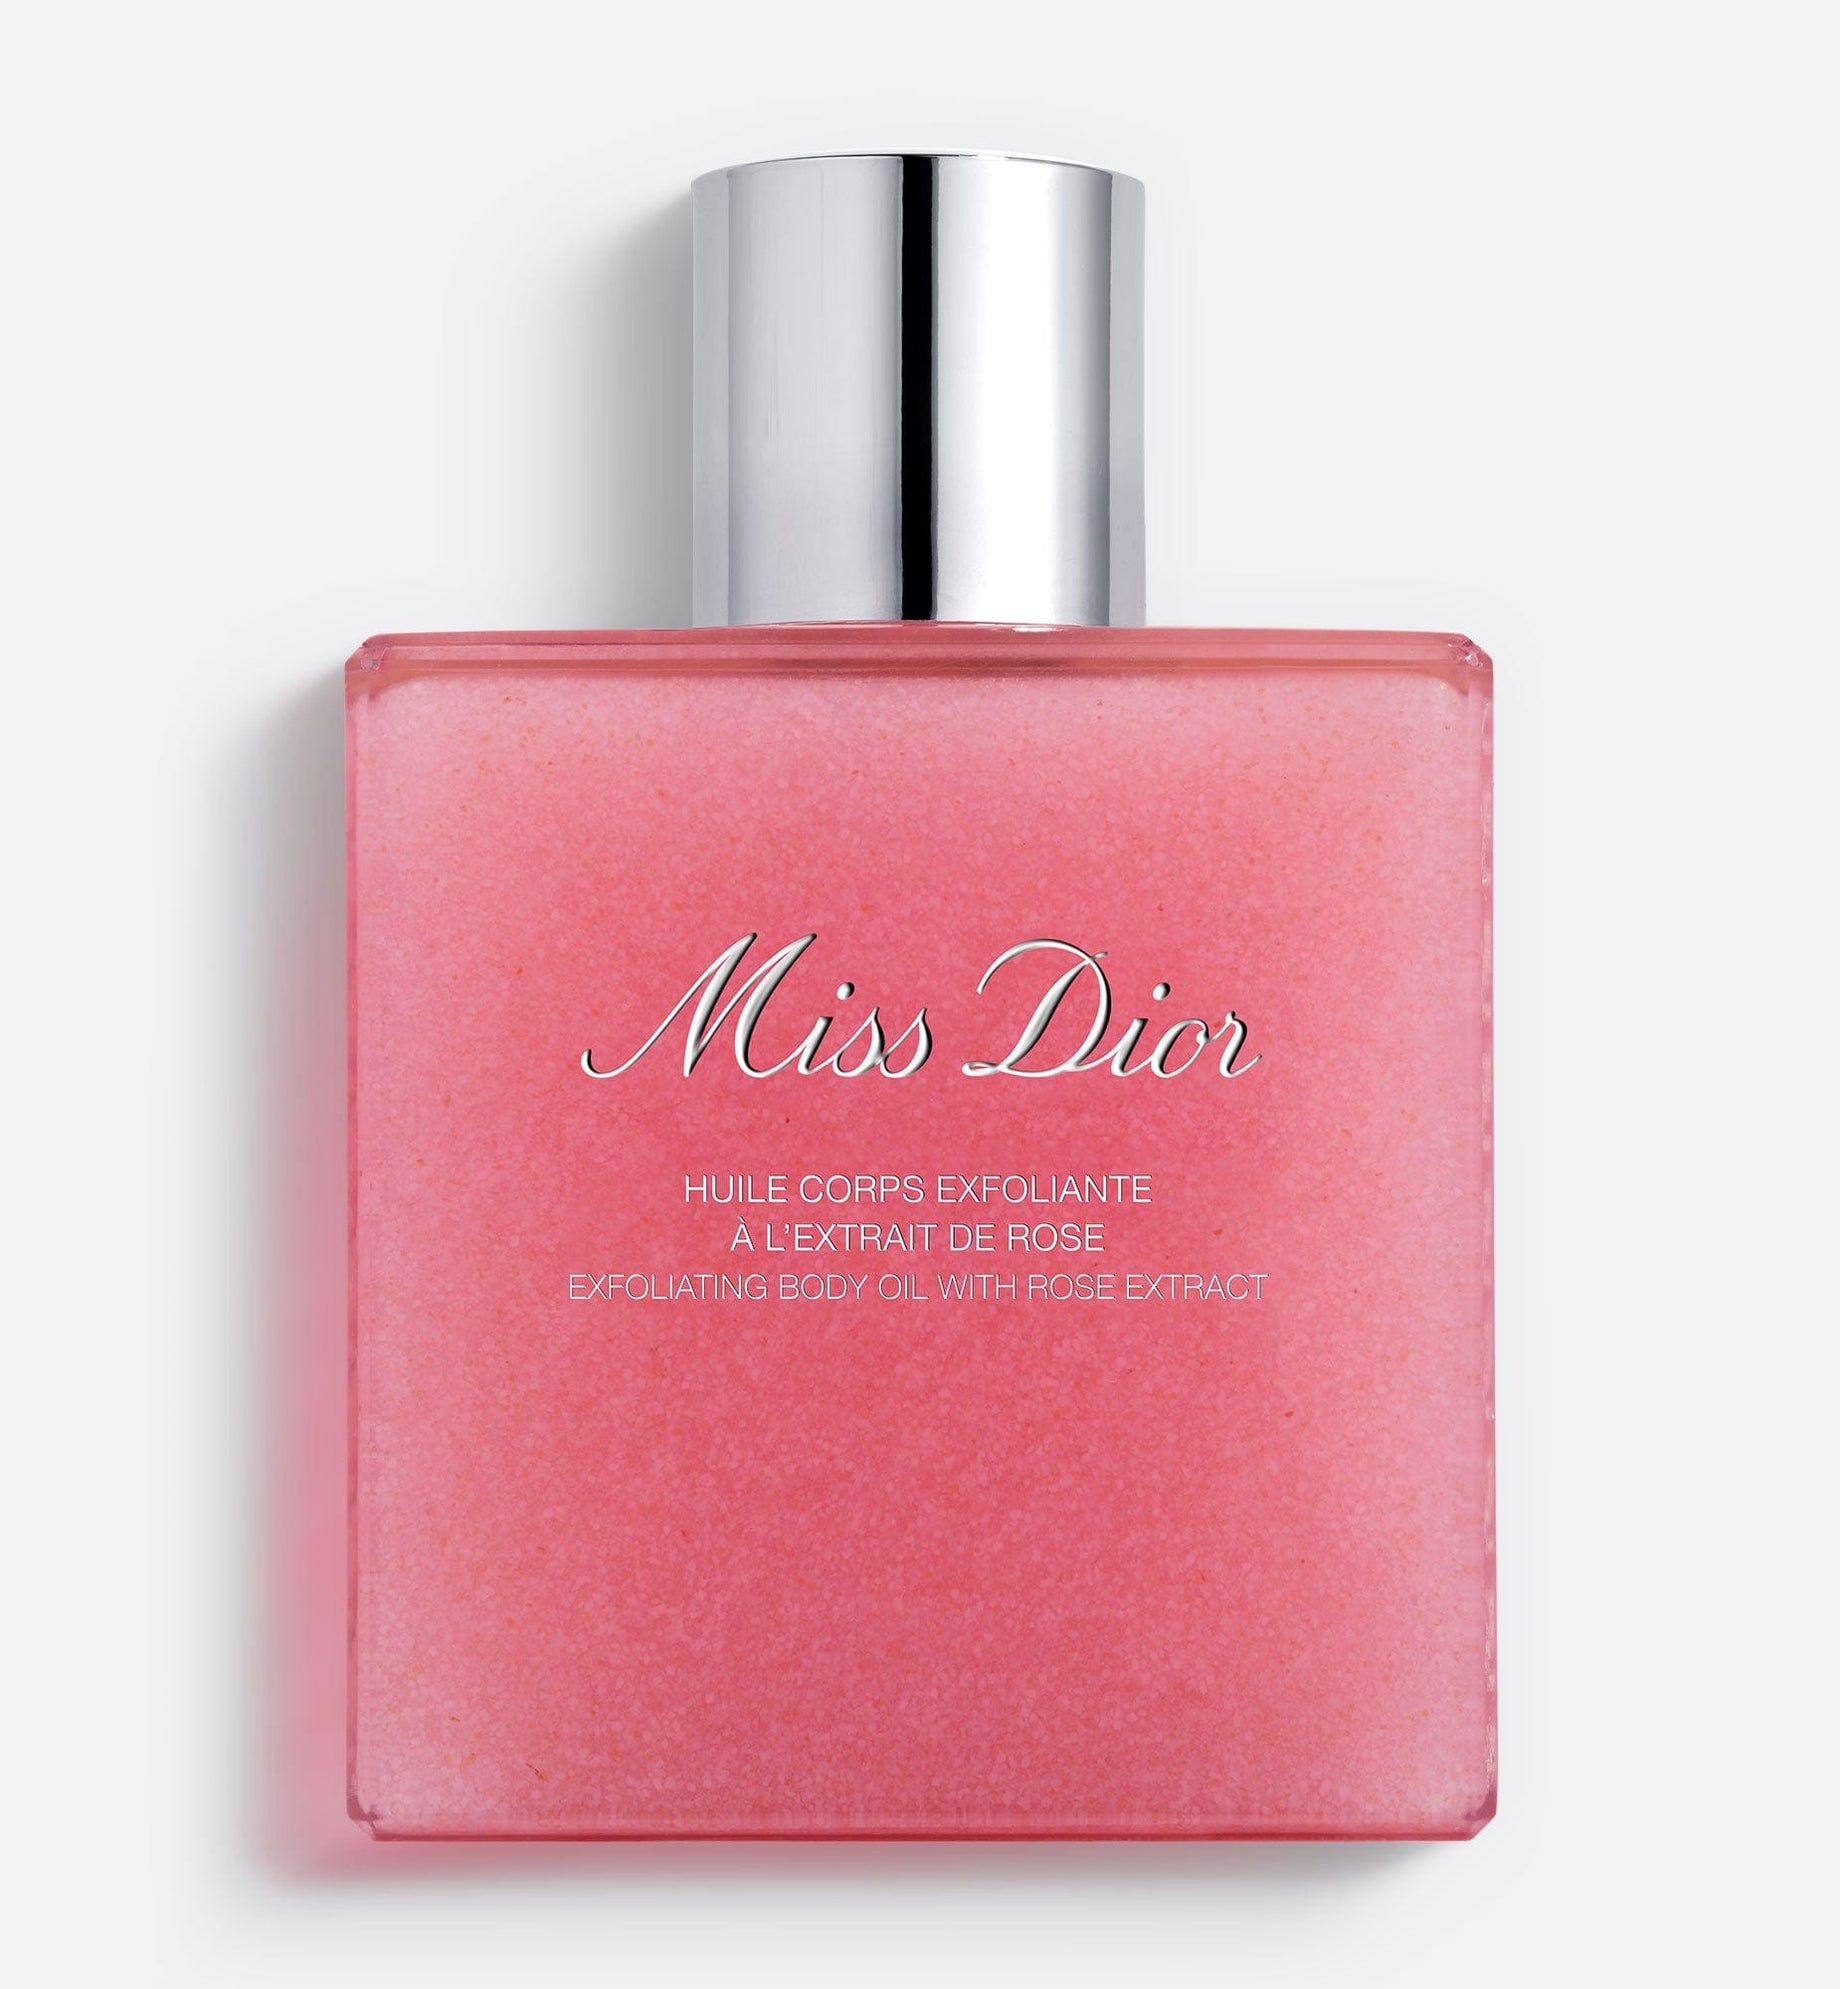 MISS DIOR EXFOLIATING BODY OIL WITH ROSE EXTRACT